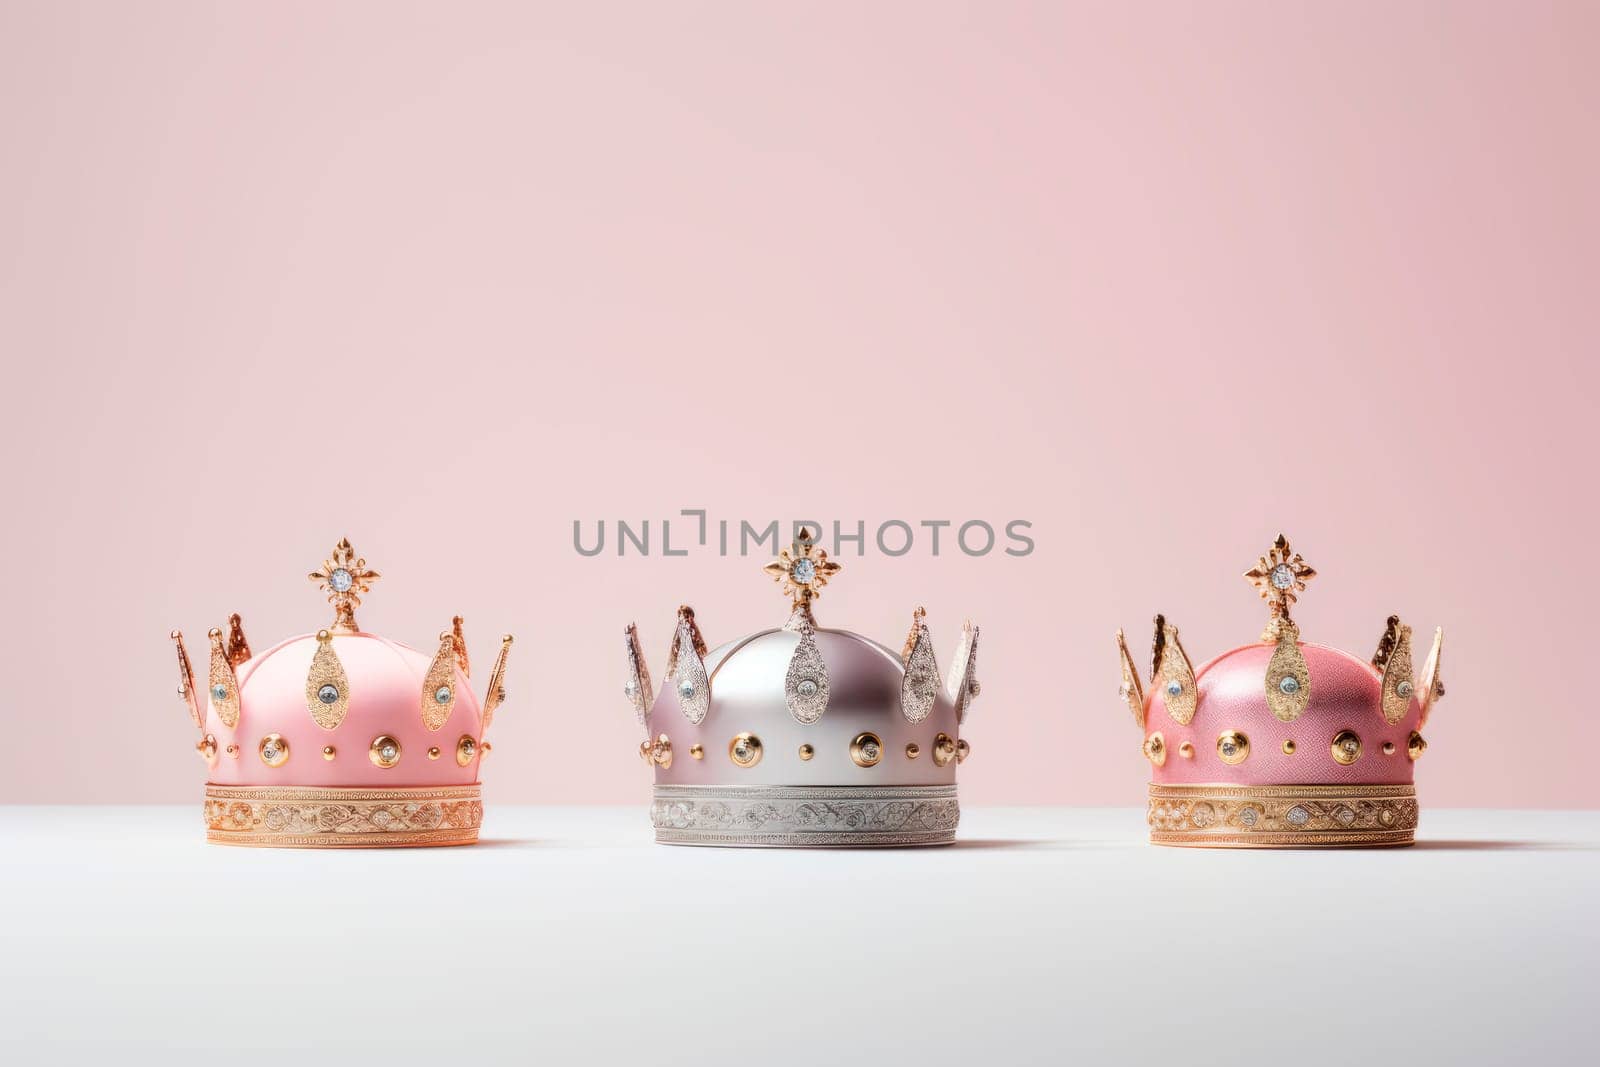 Three crowns as a symbol of the celebration of the Day of the Three Kings.